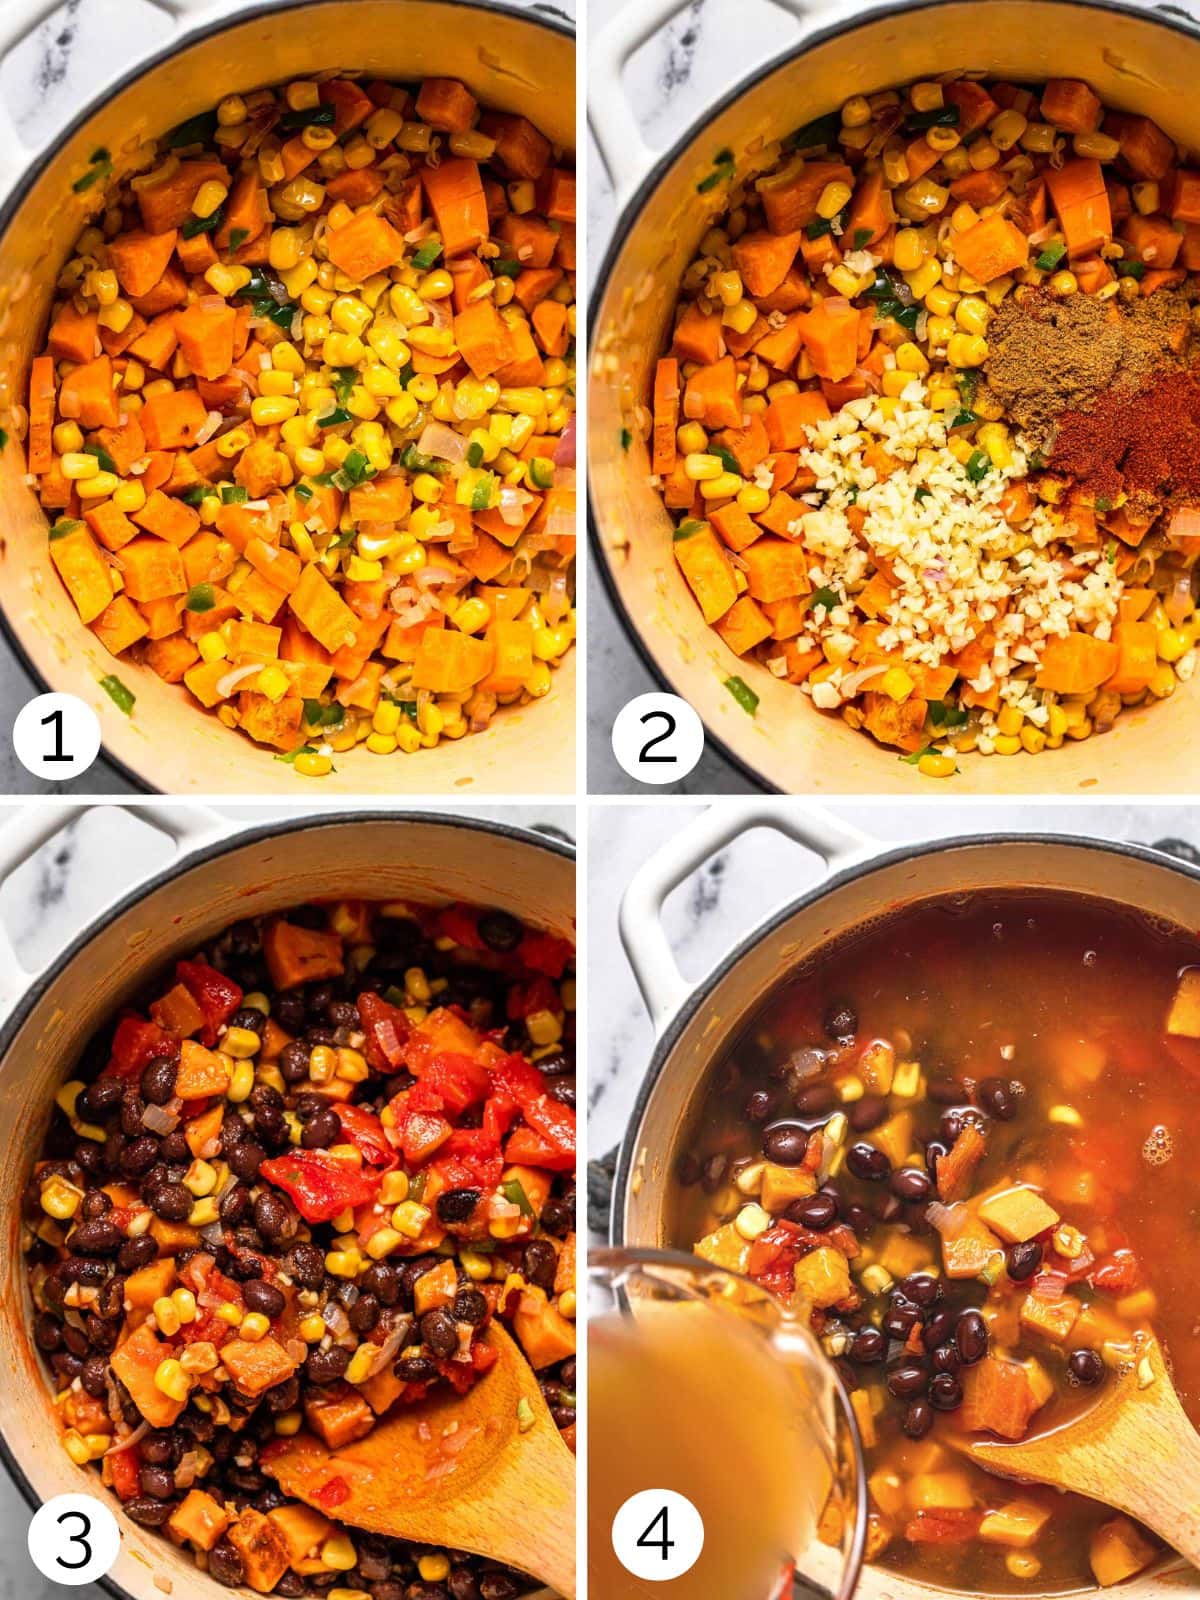 How to make vegetarian tortilla soup step by step.